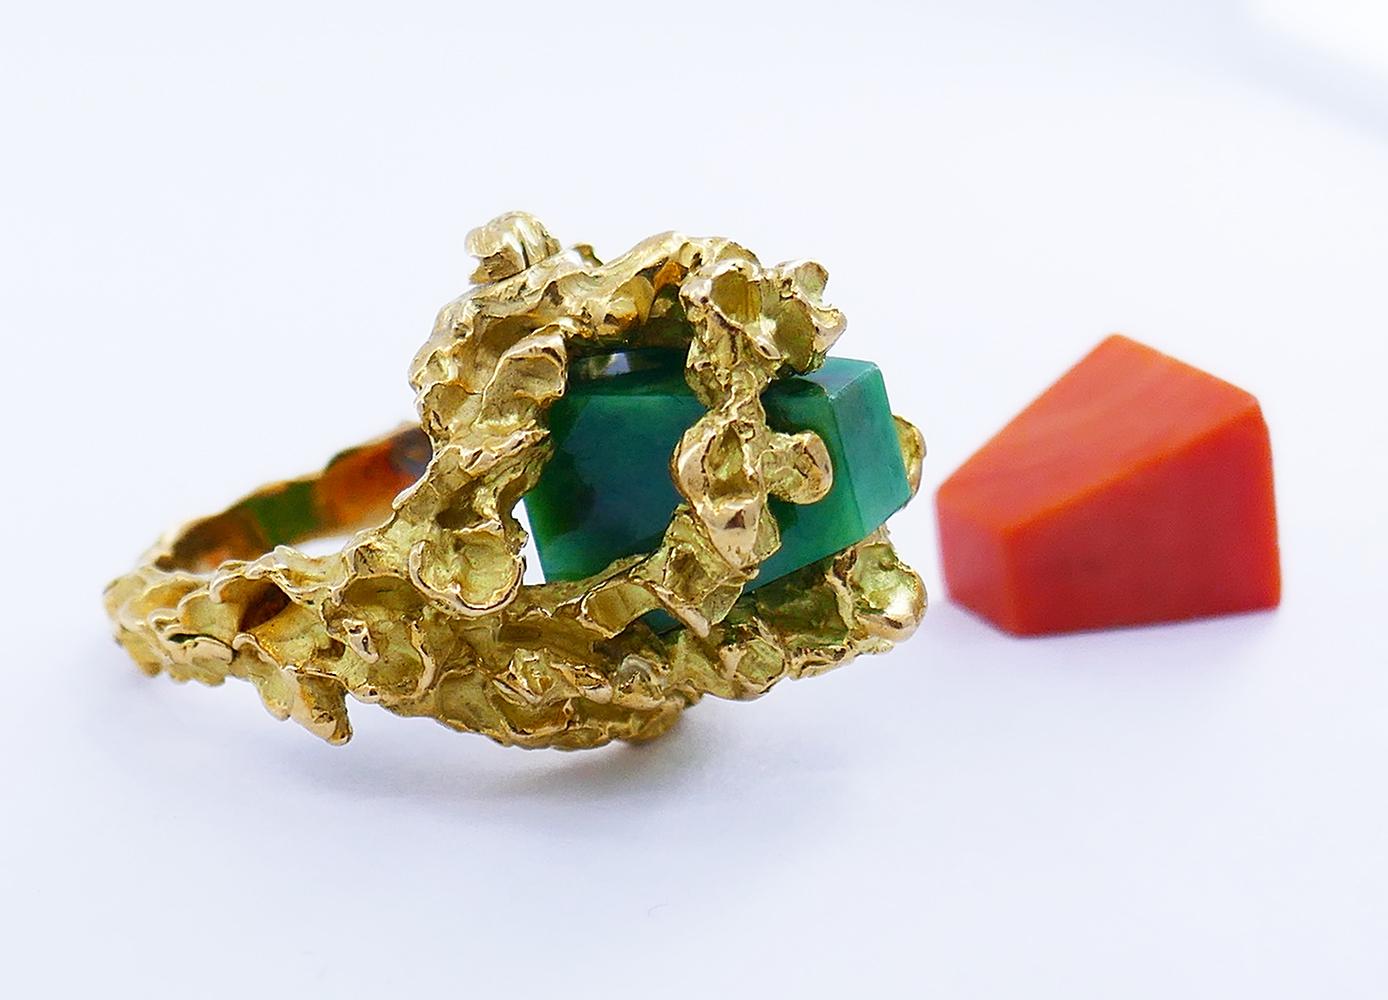 Women's Midcentury Chaumet Ring 18k Gold Coral Jade French Vintage Modernist For Sale